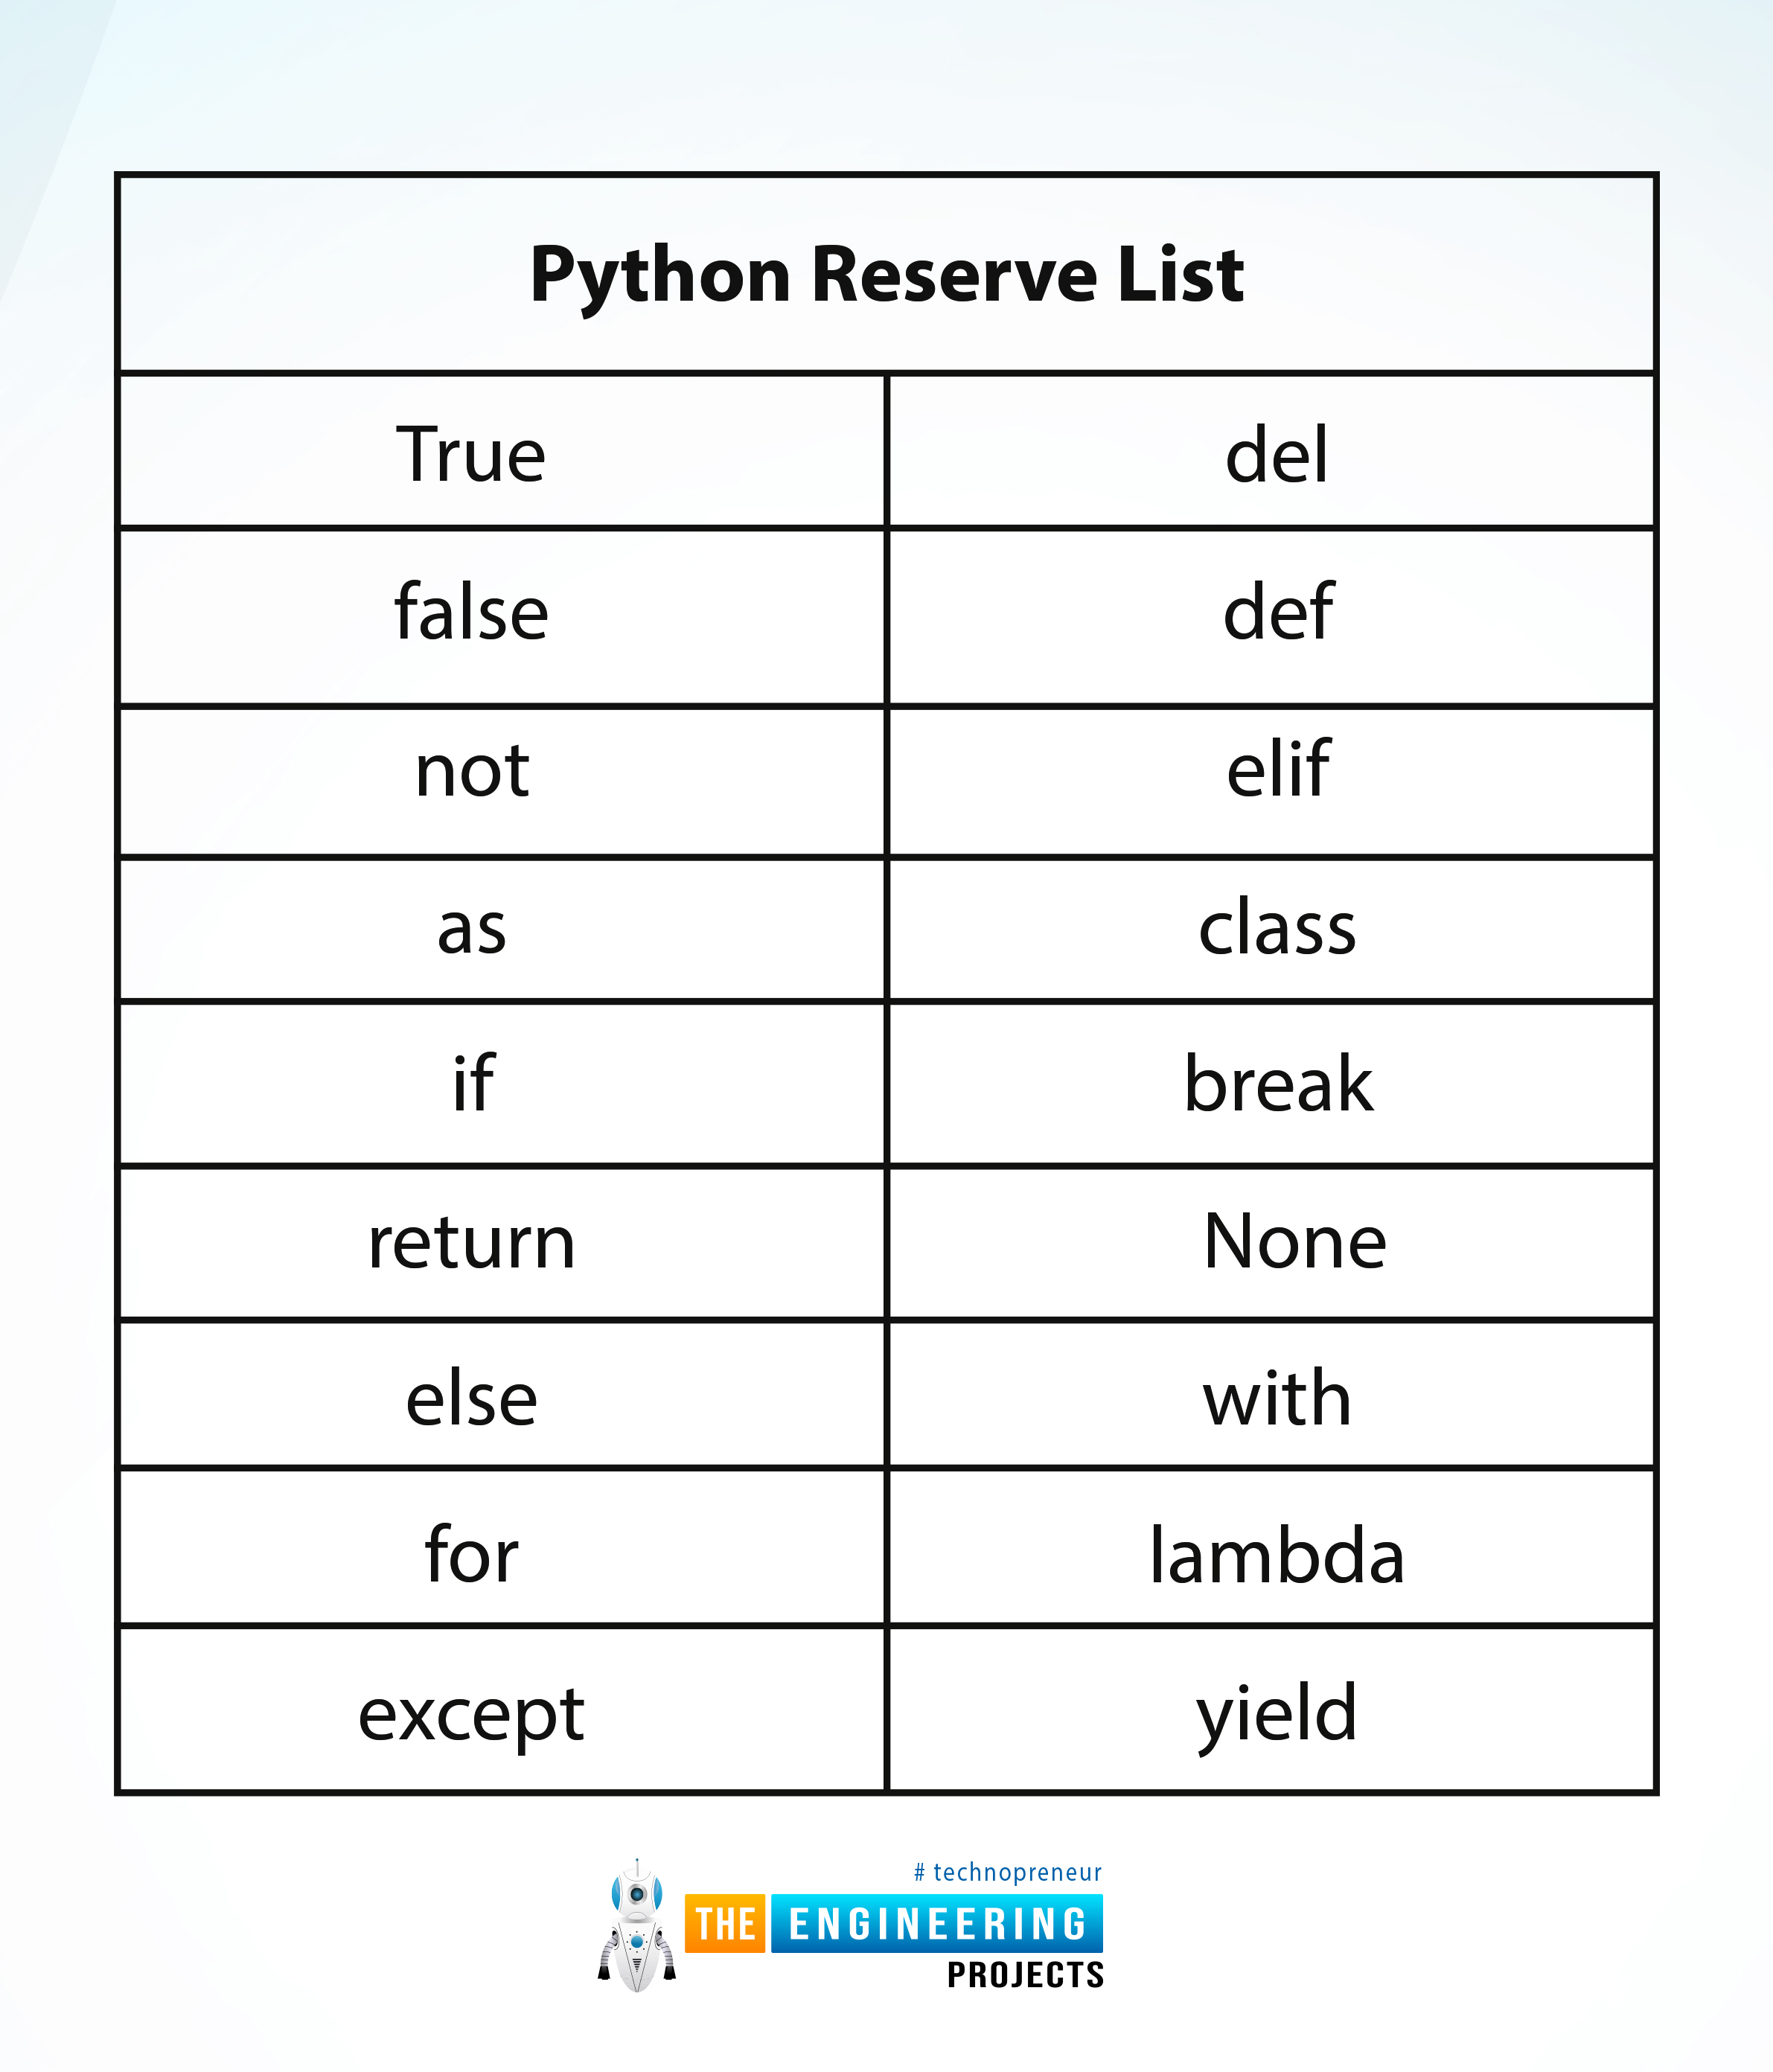 Python Built-in Functions in TensorFlow, Python Built-in Functions, Built-in Python Functions, python functions